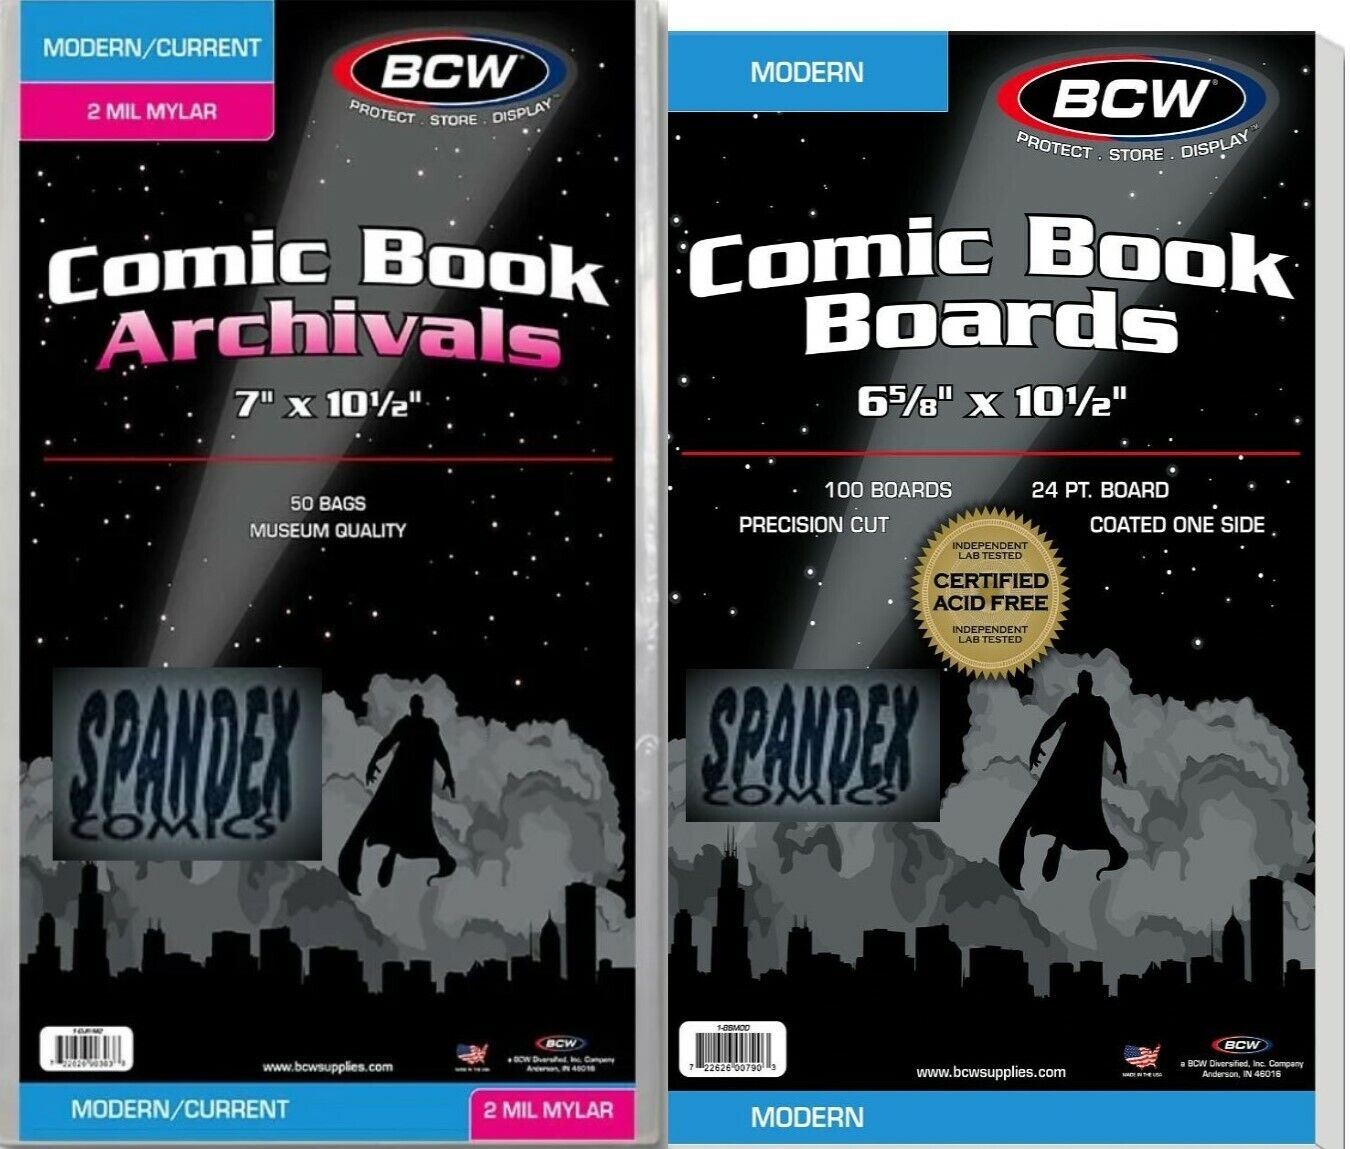 100 BCW Current Modern 2-Mil Mylar Archival's Comic Bags +100 BCW Modern Boards